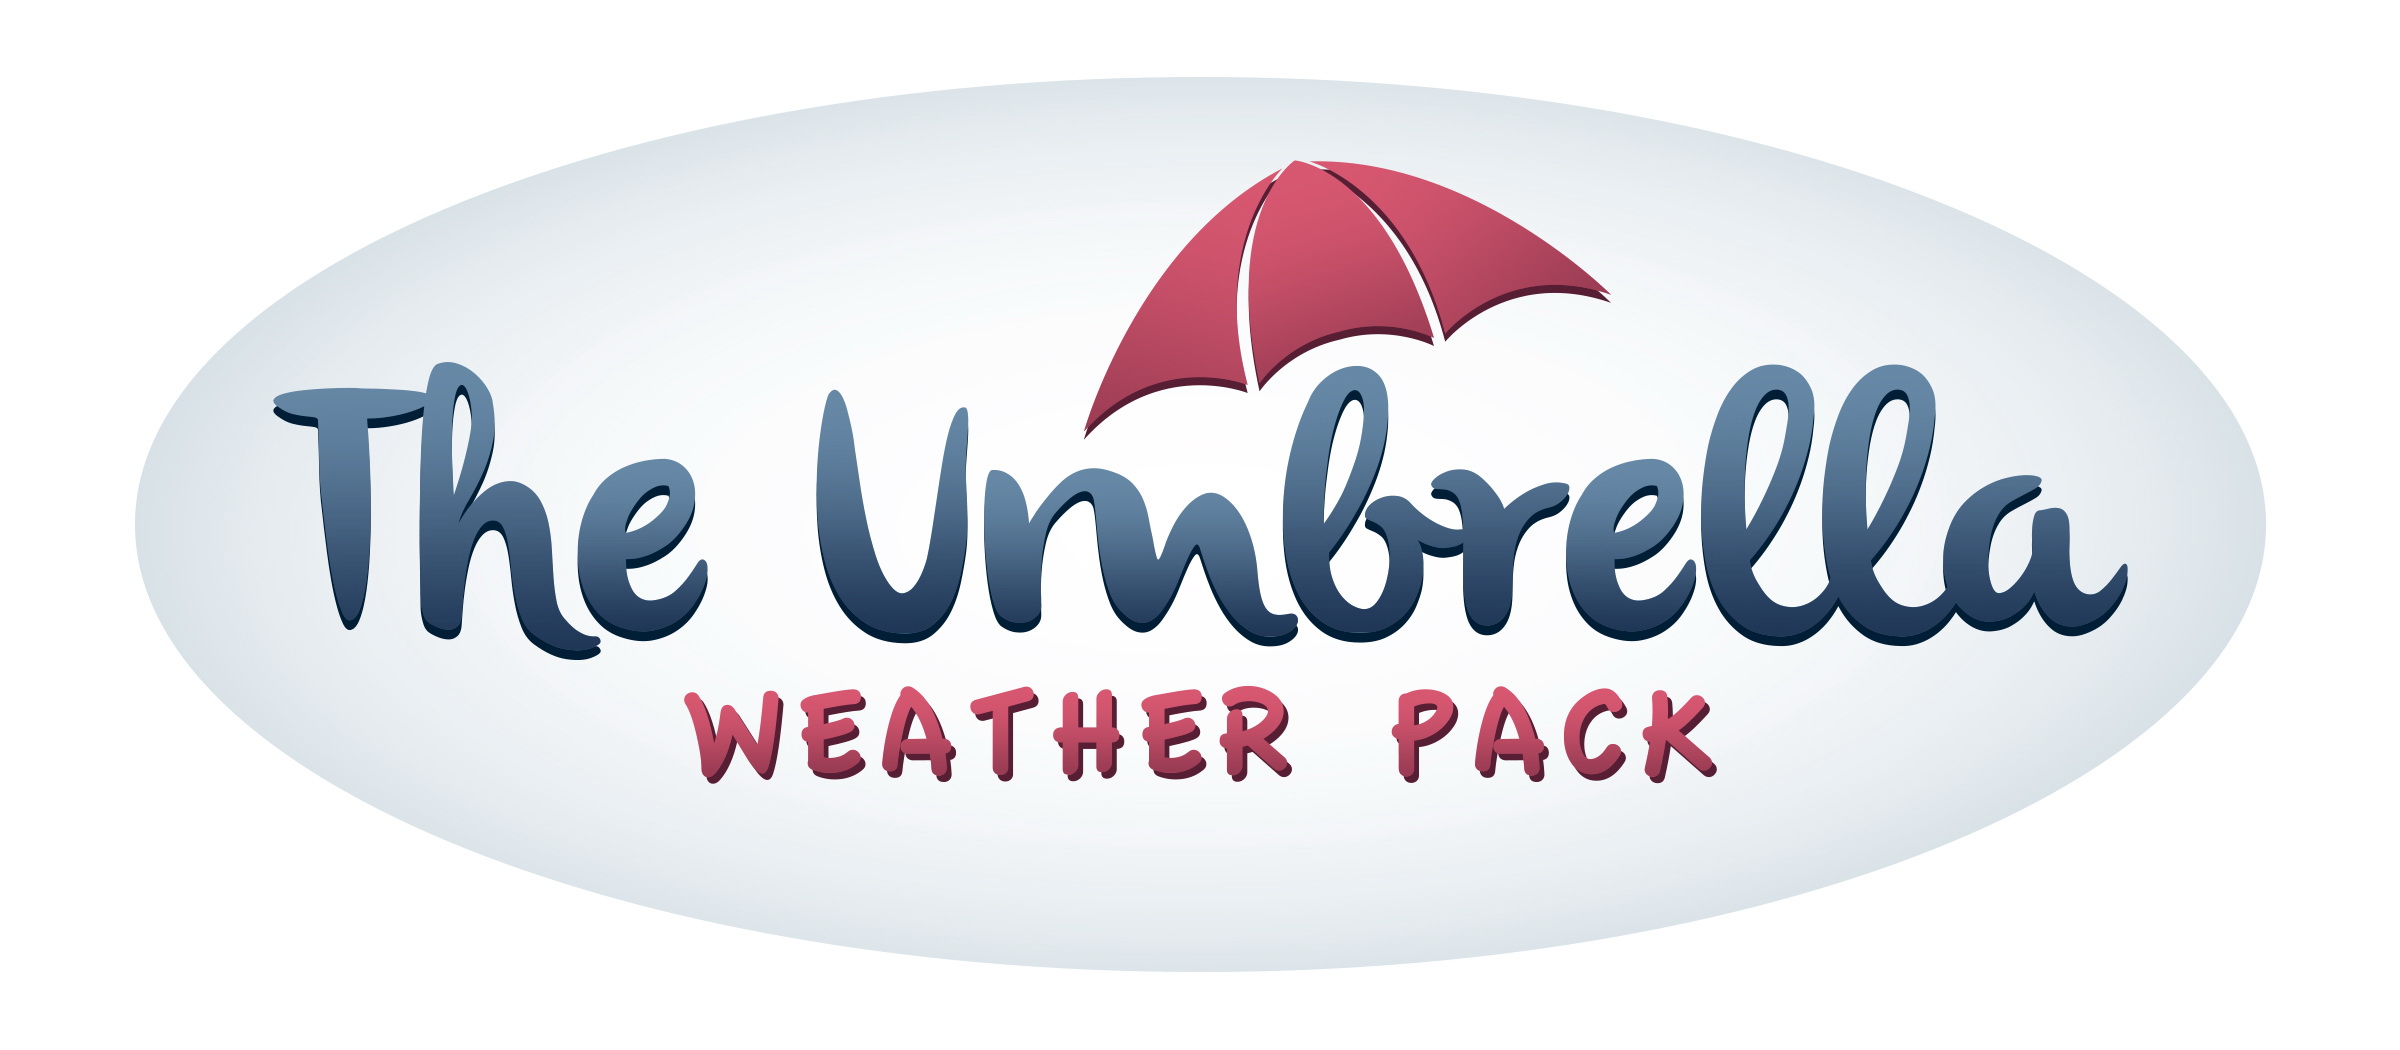 The umbrella weather pack is a light weight water resistant flat vest with a water resistant hood